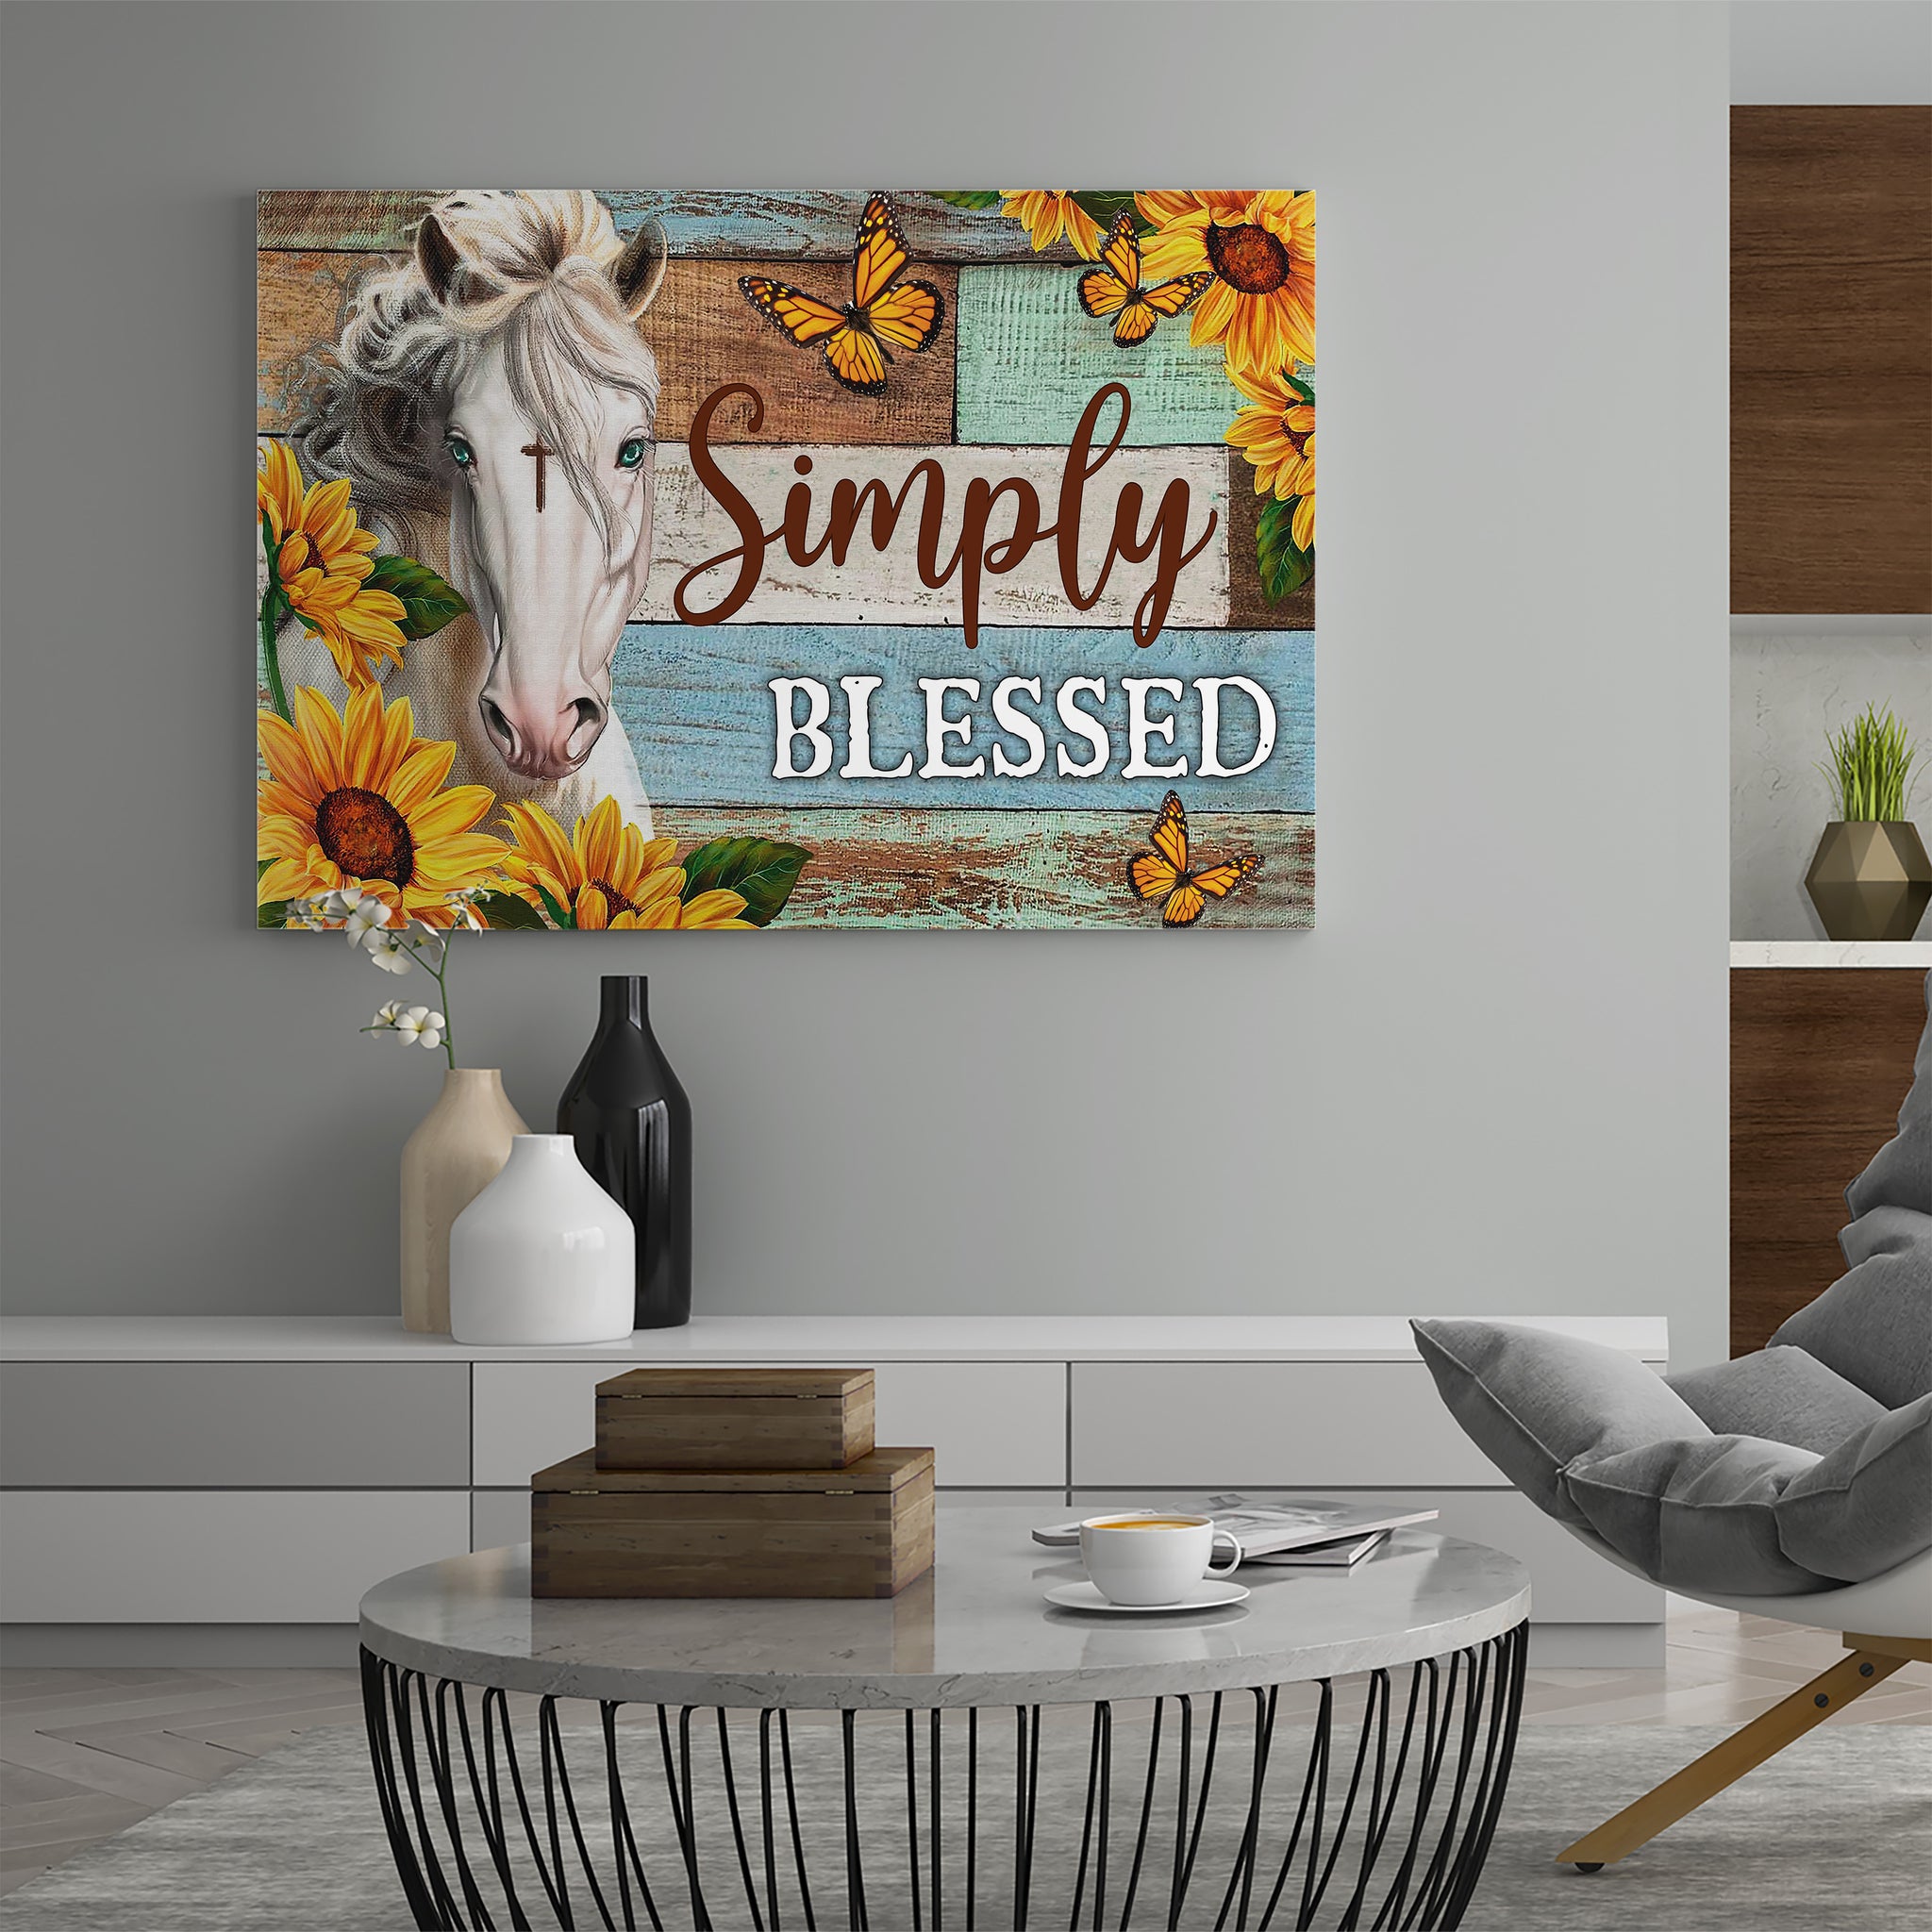 Customized Picture Frame, Simply Blessed Poster, Horse Lover Gifts, Farmhouse Christmas Decor, Country Decor, Living Room Decor